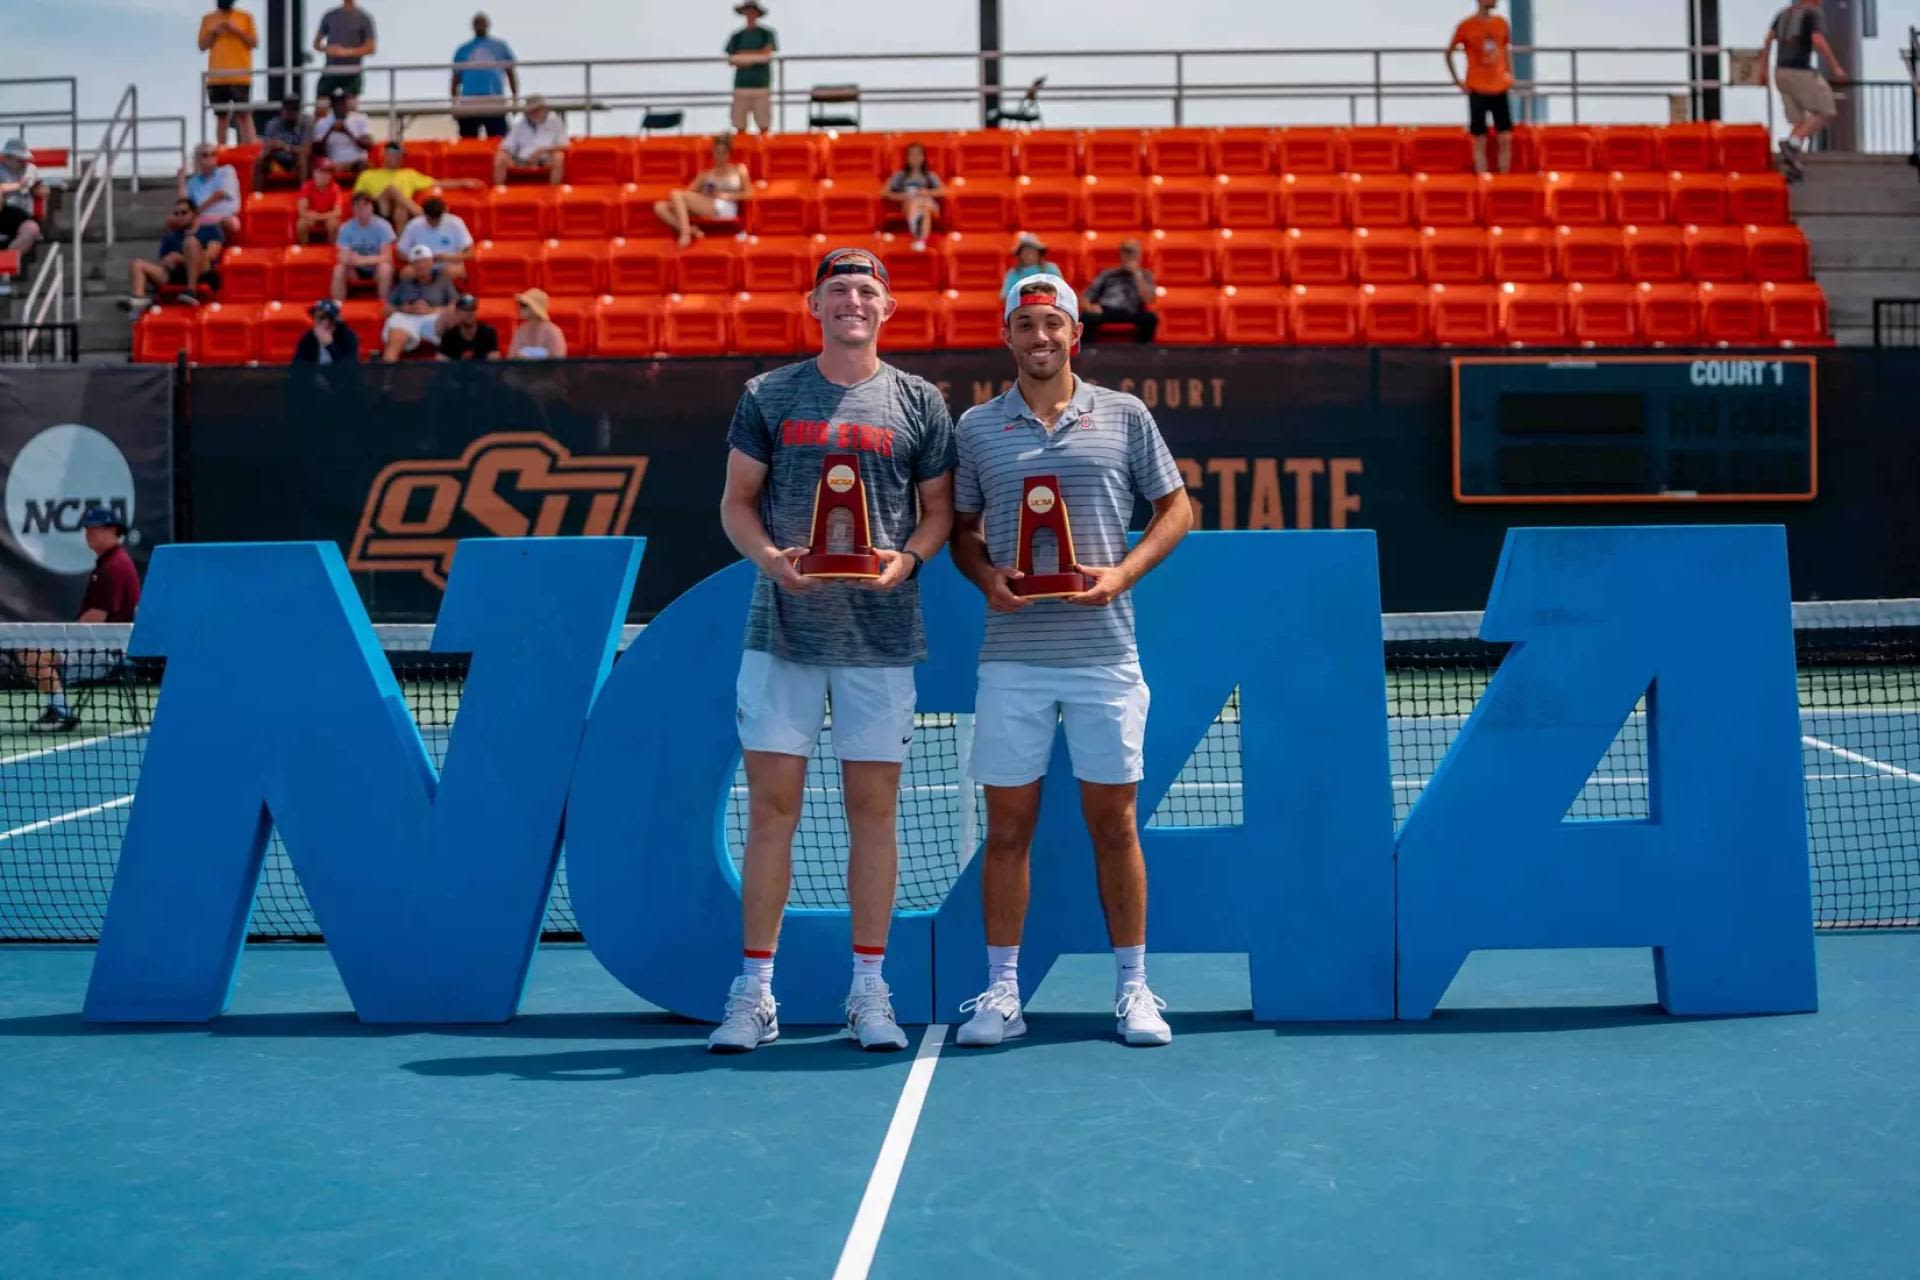 Ohio State wins the NCAA doubles for the 2nd consecutive year